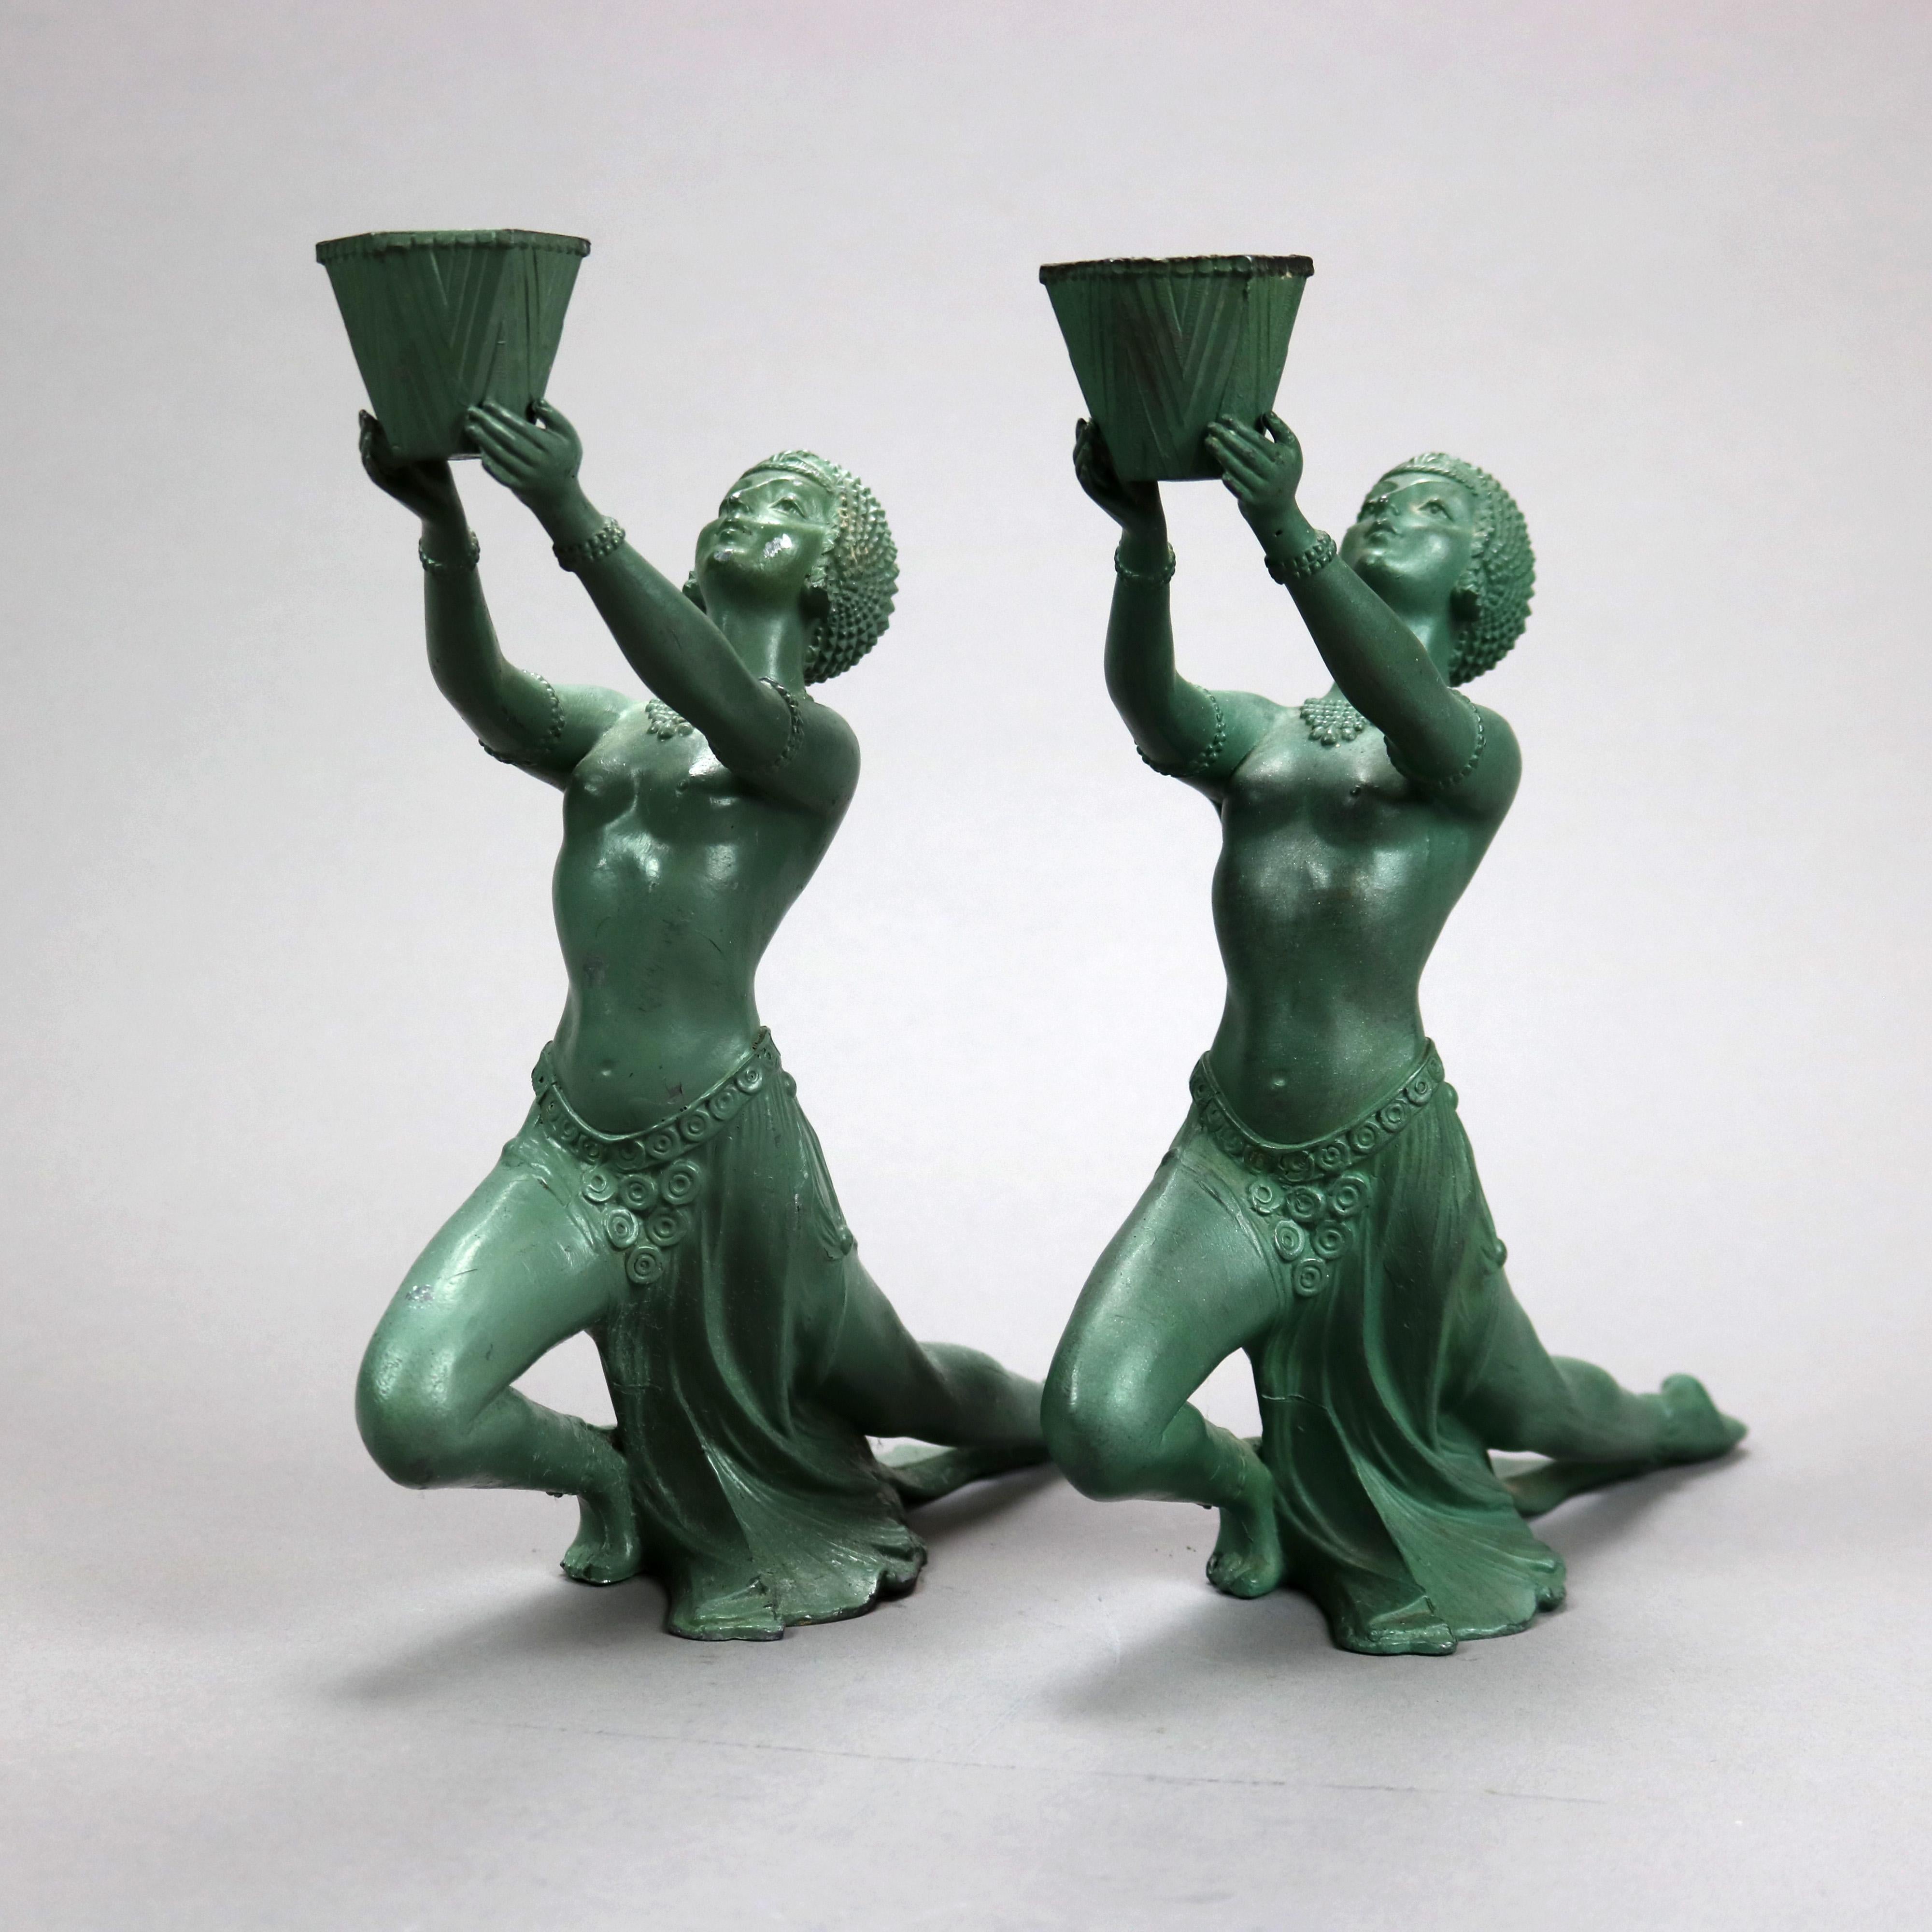 An antique pair of French Art Deco figural incense burners by Vantines offer green painted cast metal figures of Egyptian women with extended arms holding incense burners, signed on base Vantines, c1930

Measures - 9.5'' H x 2.75'' W x 9.75'' D.